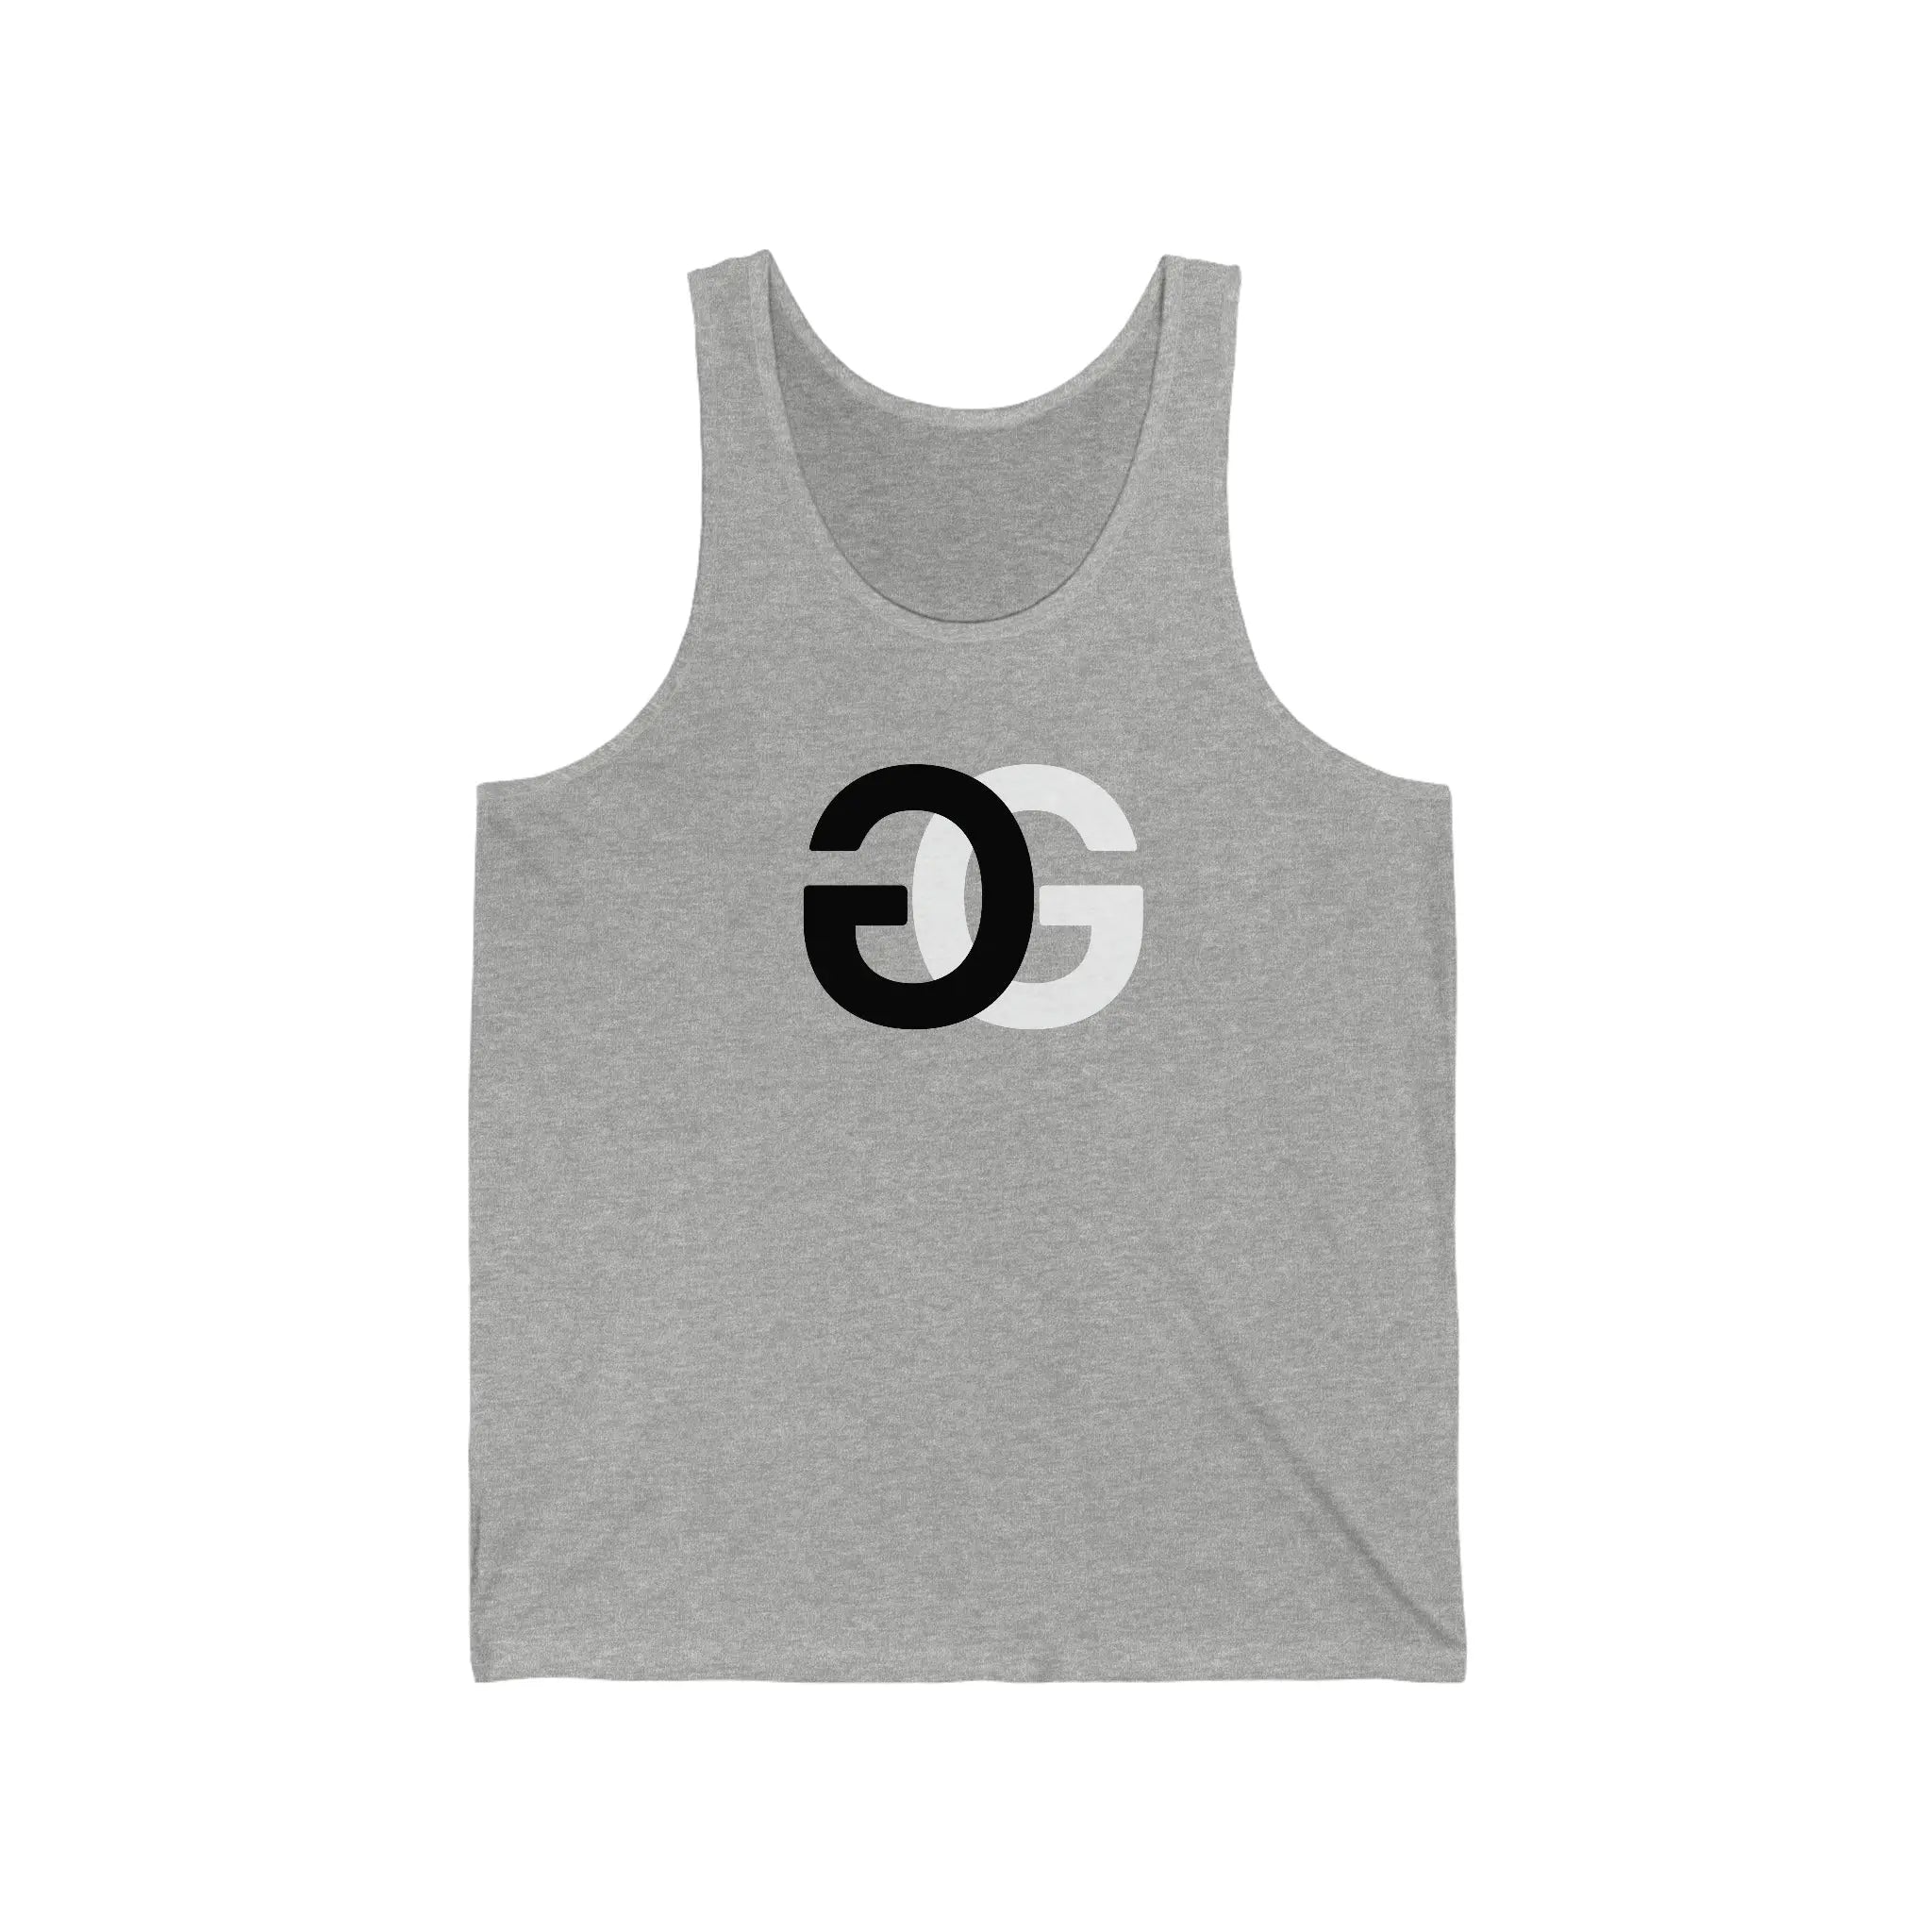  G is for Groove (Black and White) Relaxed Fit Jersey Tank Tank Top2XLAthleticHeather